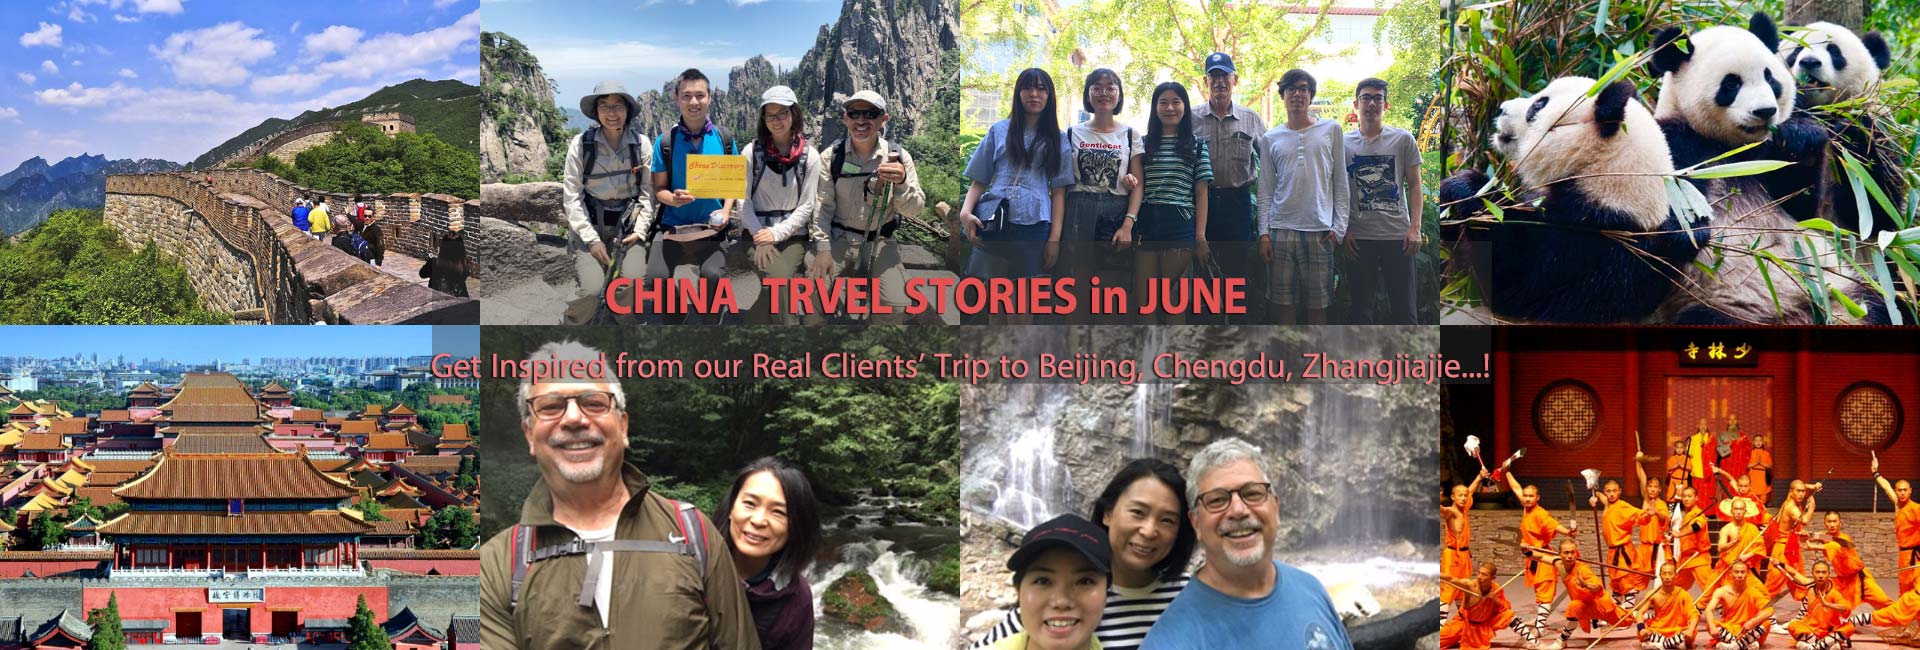 China Travel Stories in June